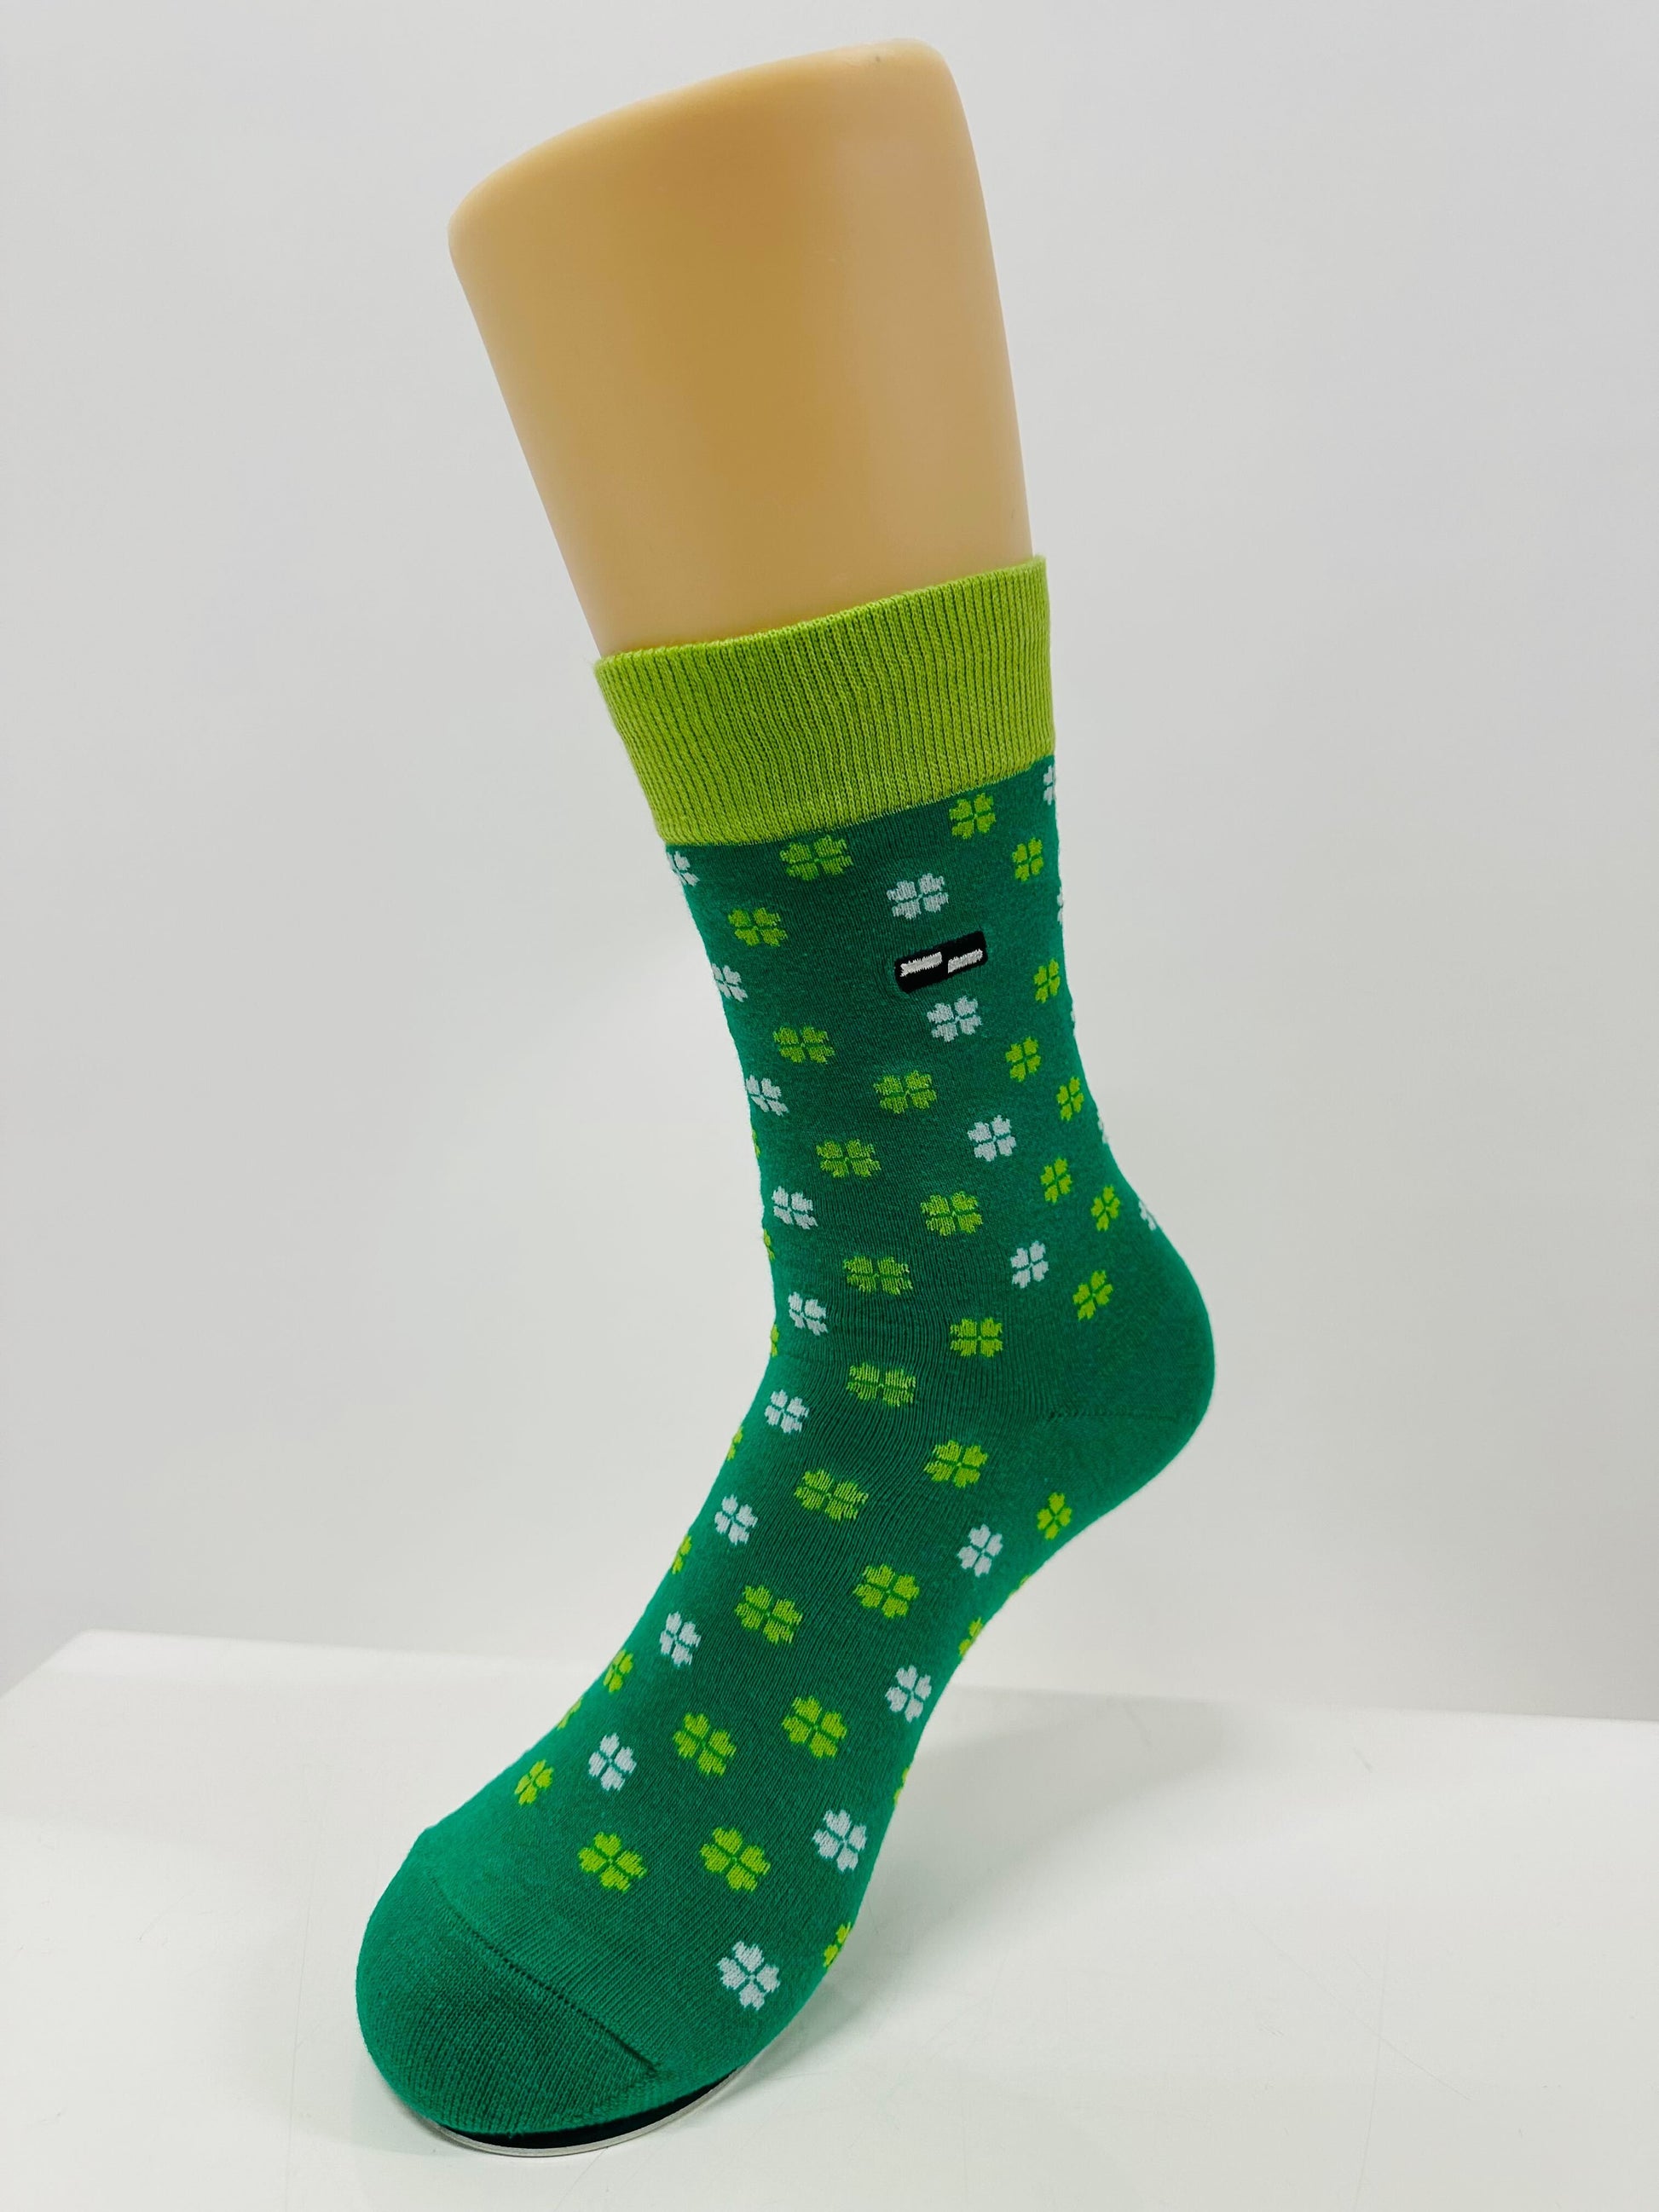 Women's TrouSox Dress Socks featuring lucky clover pattern, crafted from premium Cotton, Polyester, and Spandex for ultimate comfort and style.